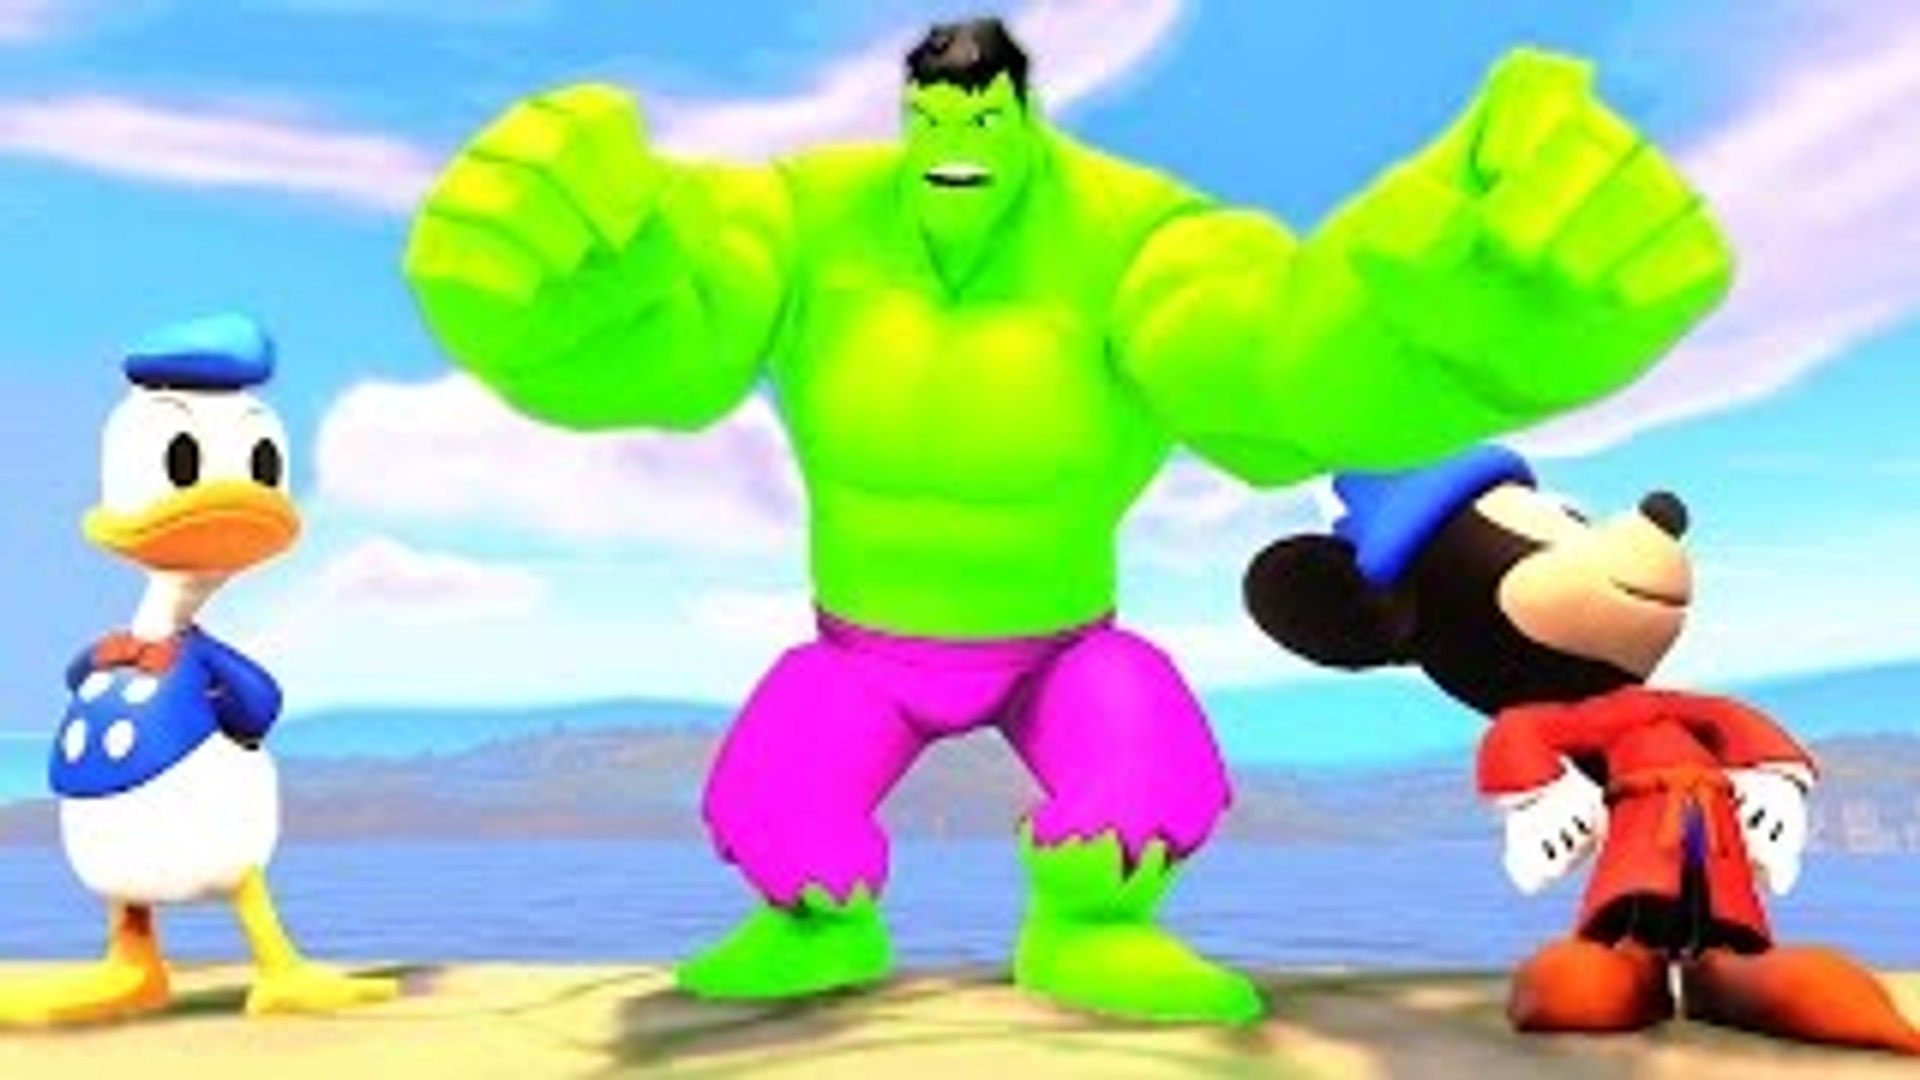 CRAZY HULK & Mickey Mouse s Car with Donald Duck Battle Race in HD! -  Dailymotion Video